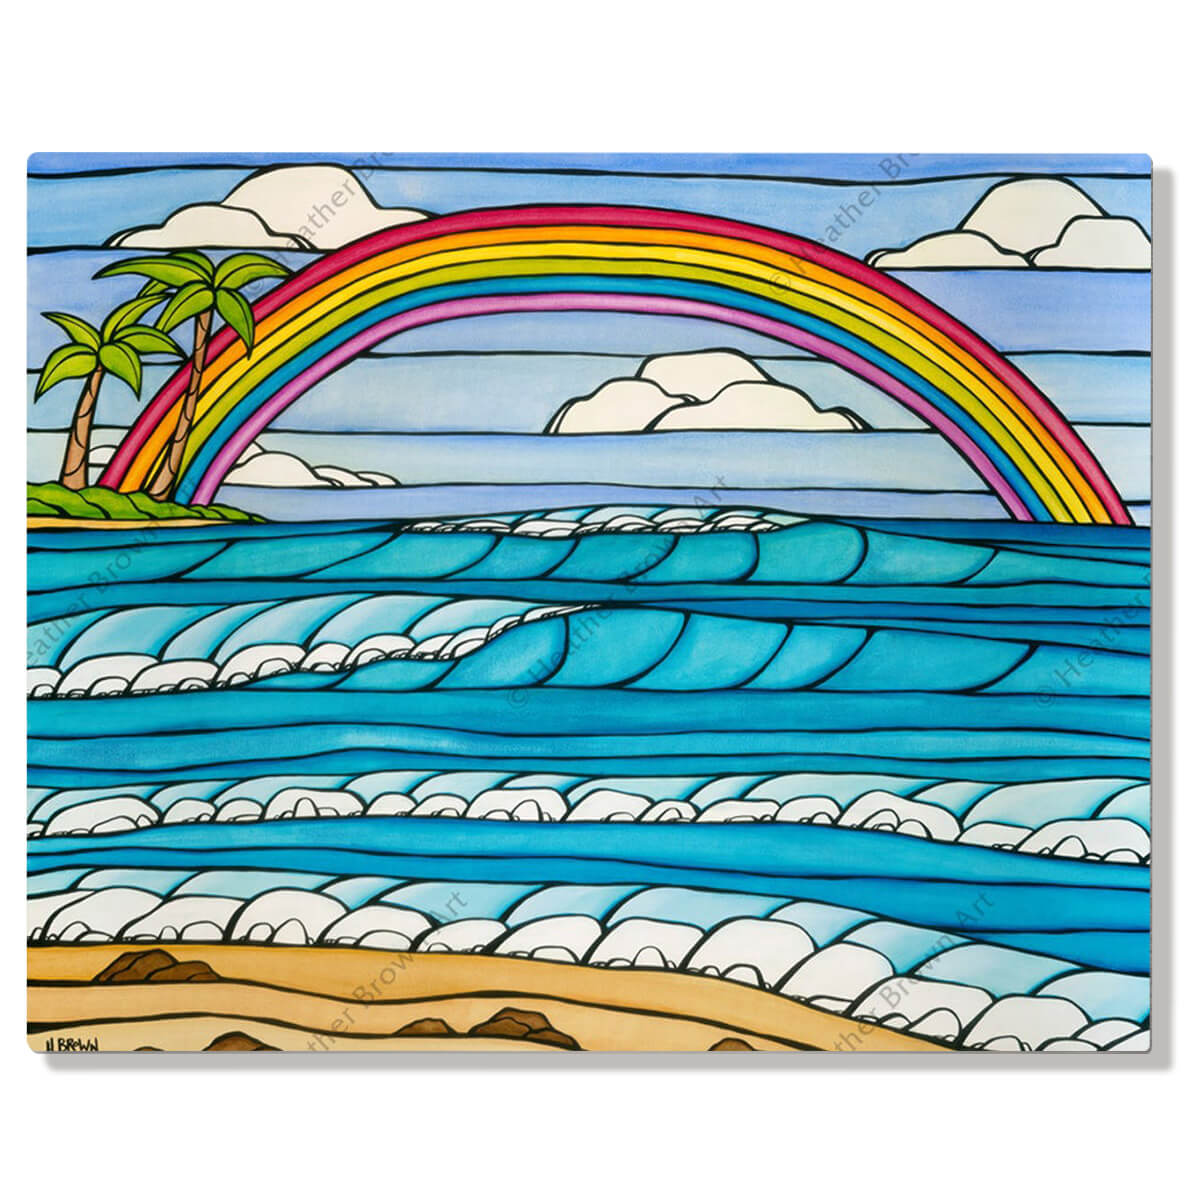 A metal art print that  features a rainbow framing an iconic view of a Hawaii beach by Hawaii surf artist Heather Brown